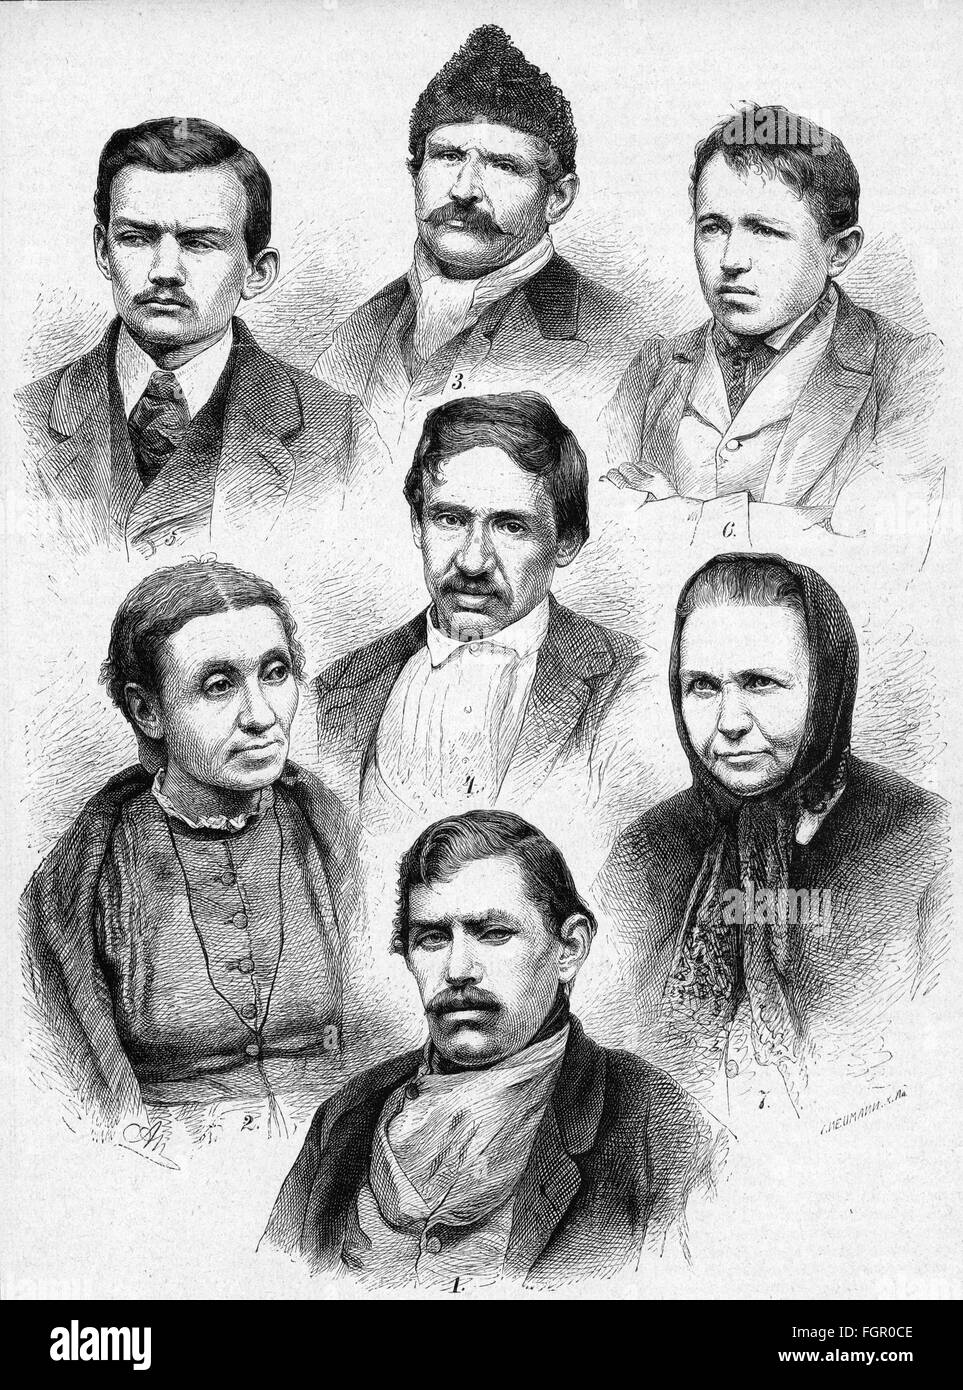 justice,crime,portraits from the Viennese rogues' gallery,after photograph,wood engraving,by A.Neumann,19th century,19th century,graphic,graphics,portrait,Austria,Vienna,burglar,burgler,burglars,burglers,counterfeiter,counterfeiters,thief,thieves,receiver,fence,receivers,fences,cardsharp,cardsharper,cardsharps,cardsharpers,shoplifter,lifter,booster,shoplifters,lifters,boosters,pickpocket,dip,cutpurse,mobsman,pickpockets,dips,cutpurses,mobsmen,character,characters,phrenology,scofflaw,scofflaws,offender,criminal,o,Additional-Rights-Clearences-Not Available Stock Photo